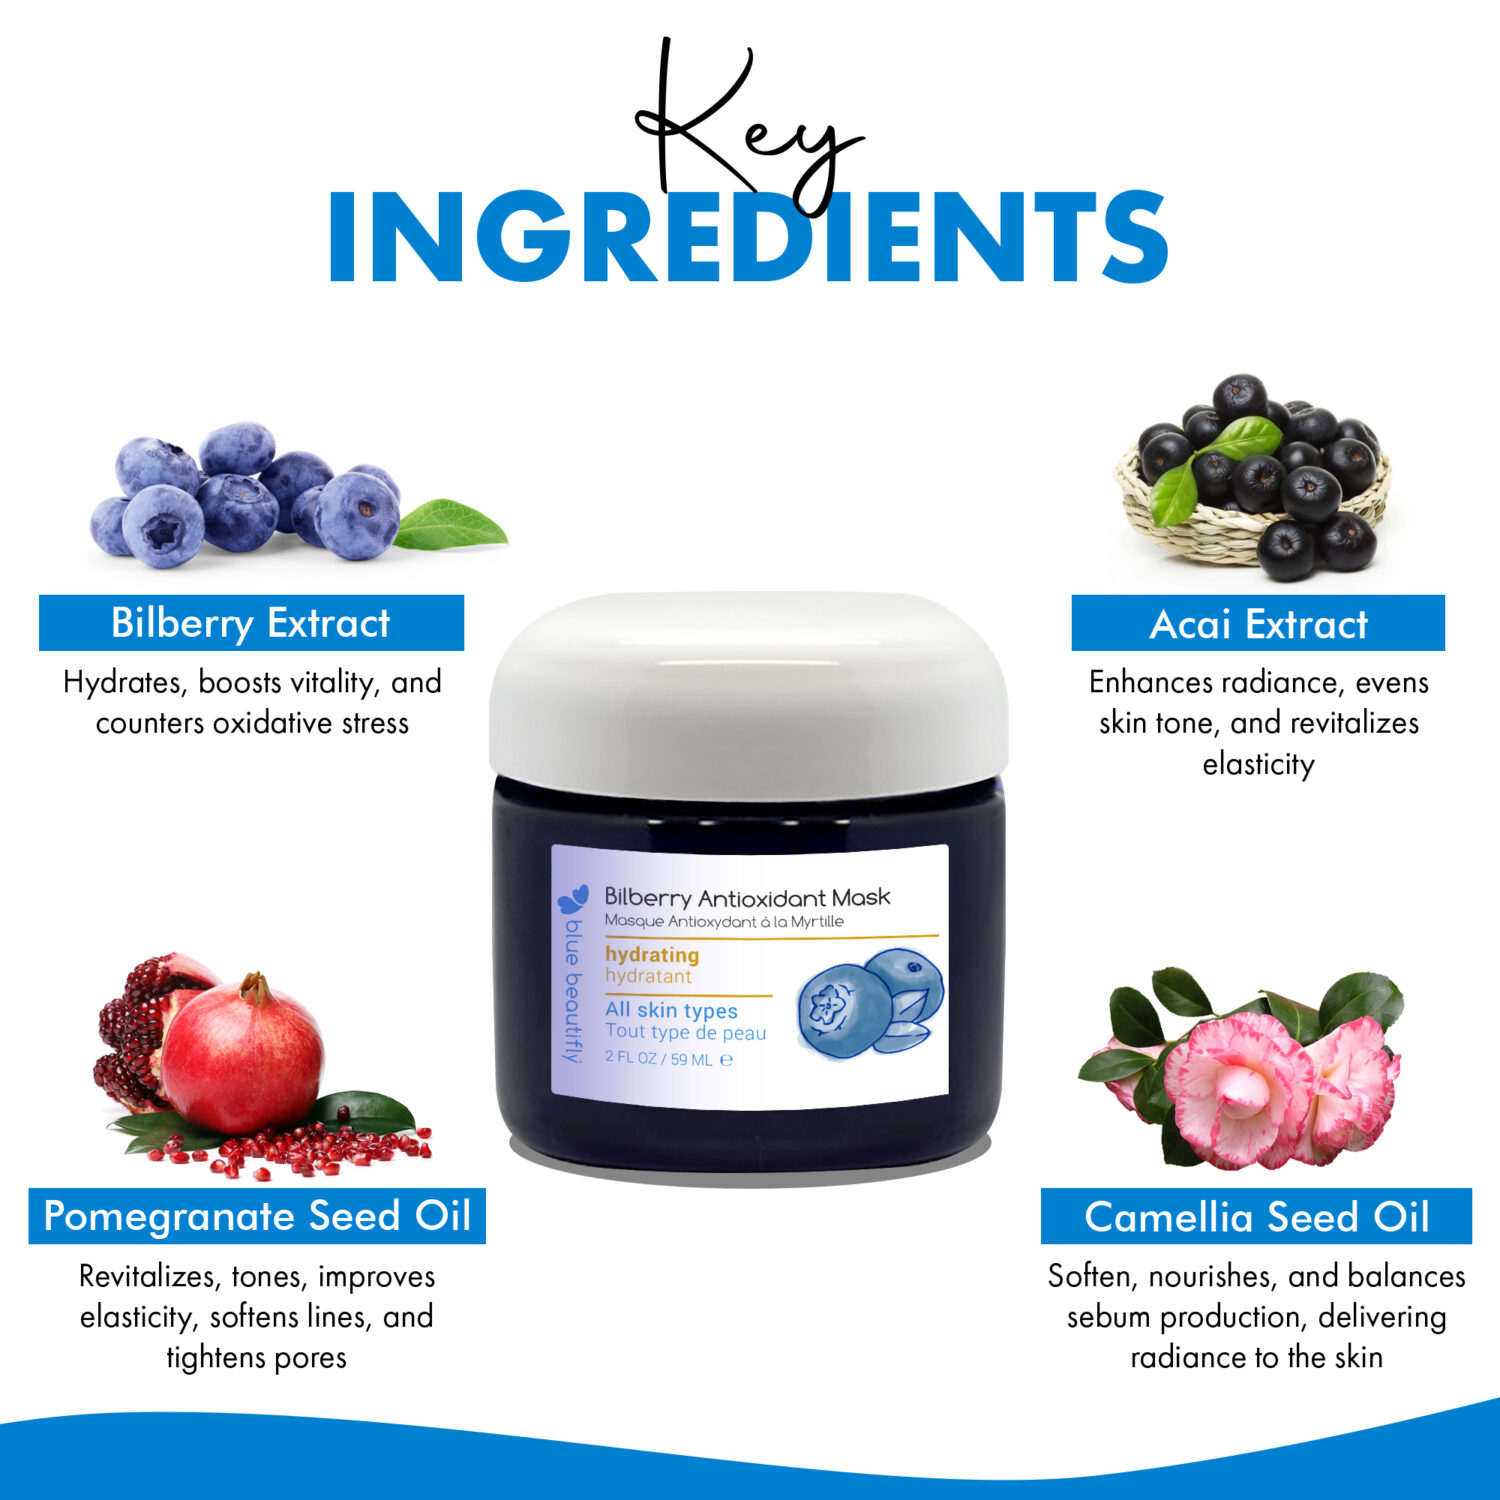 Blue Beautifly Bilberry Antioxidant Mask - Key ingredients are Bilberry Extract, Acai Extract, Pomegranate Seed Oil, and Camellia Seed Oil